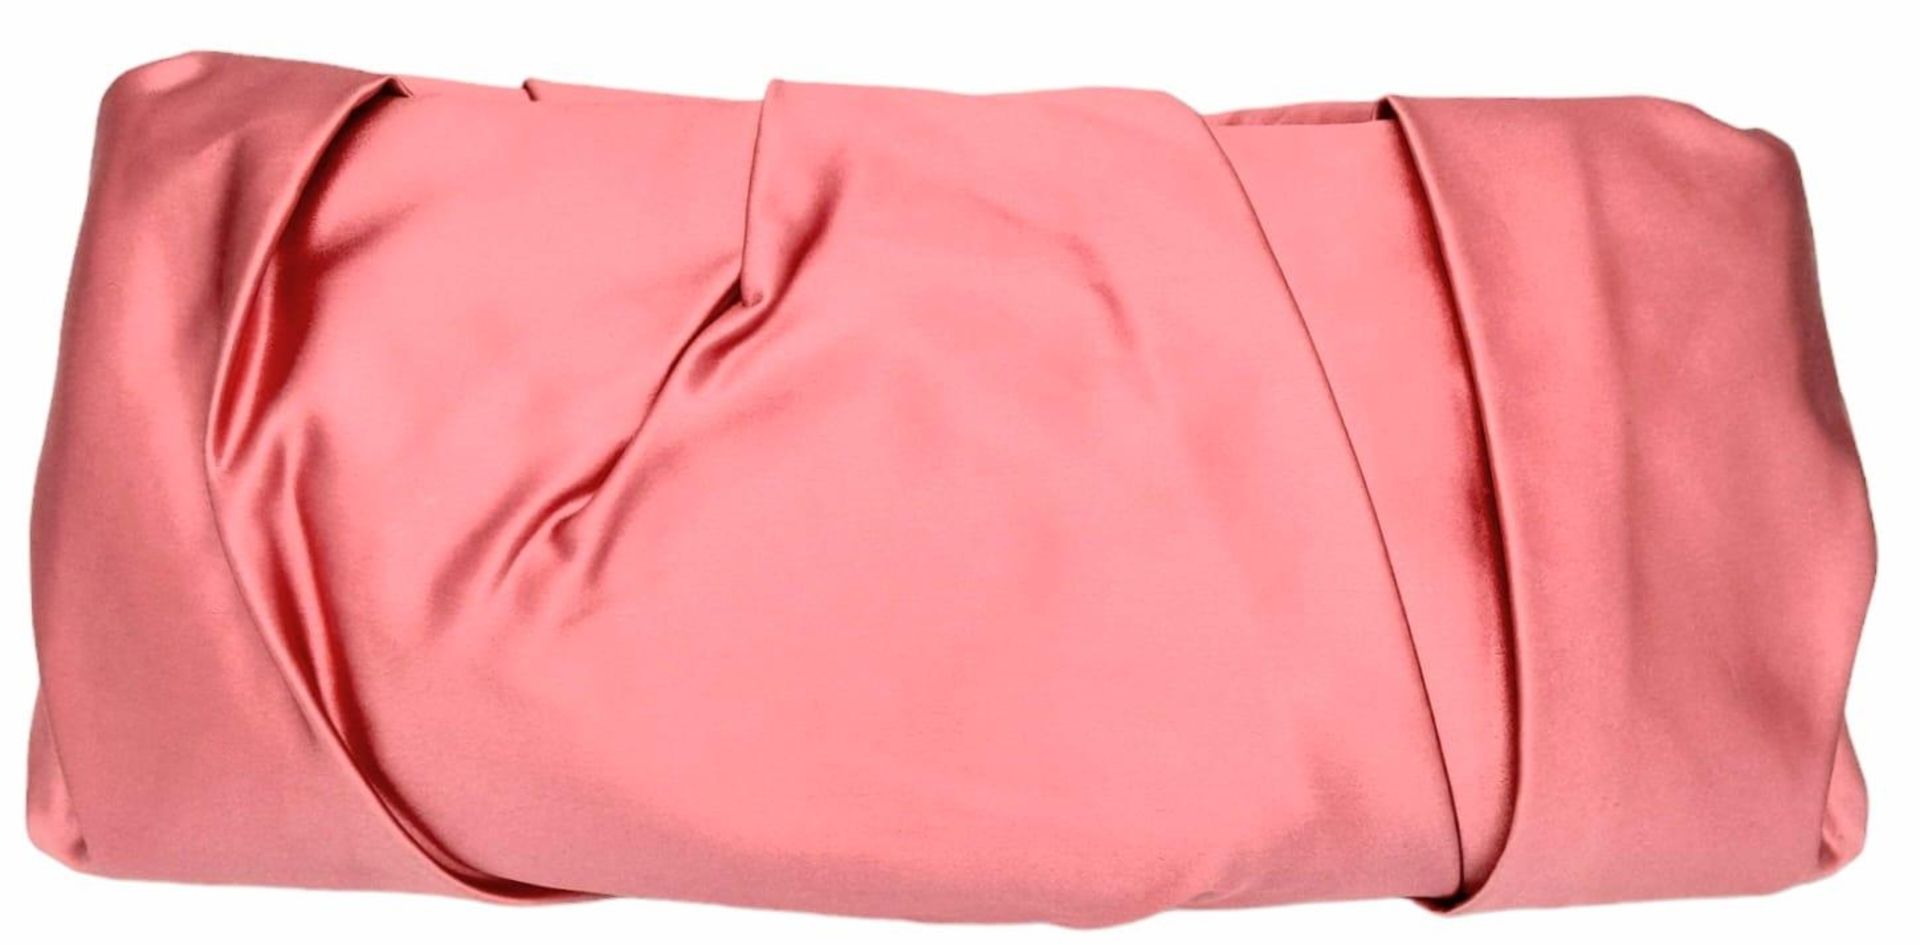 A Prada Pink Pleated Clutch Bag. Satin exterior with silver-toned hardware and press lock closure to - Image 2 of 9